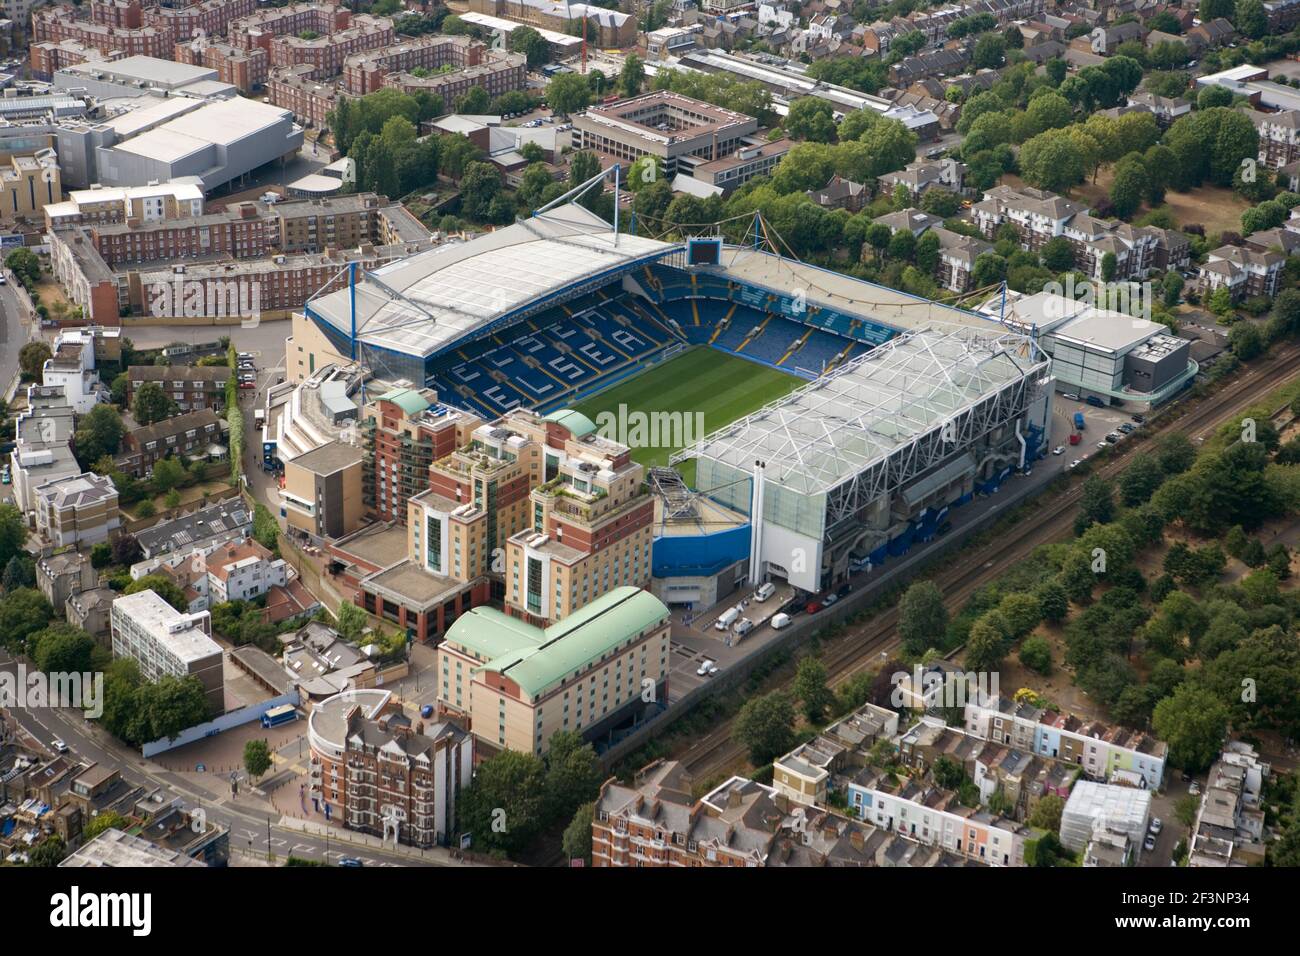 STAMFORD BRIDGE STADIUM, London. Aerial view. Home of Chelsea Football Club. Photographed in August 2006. Stock Photo